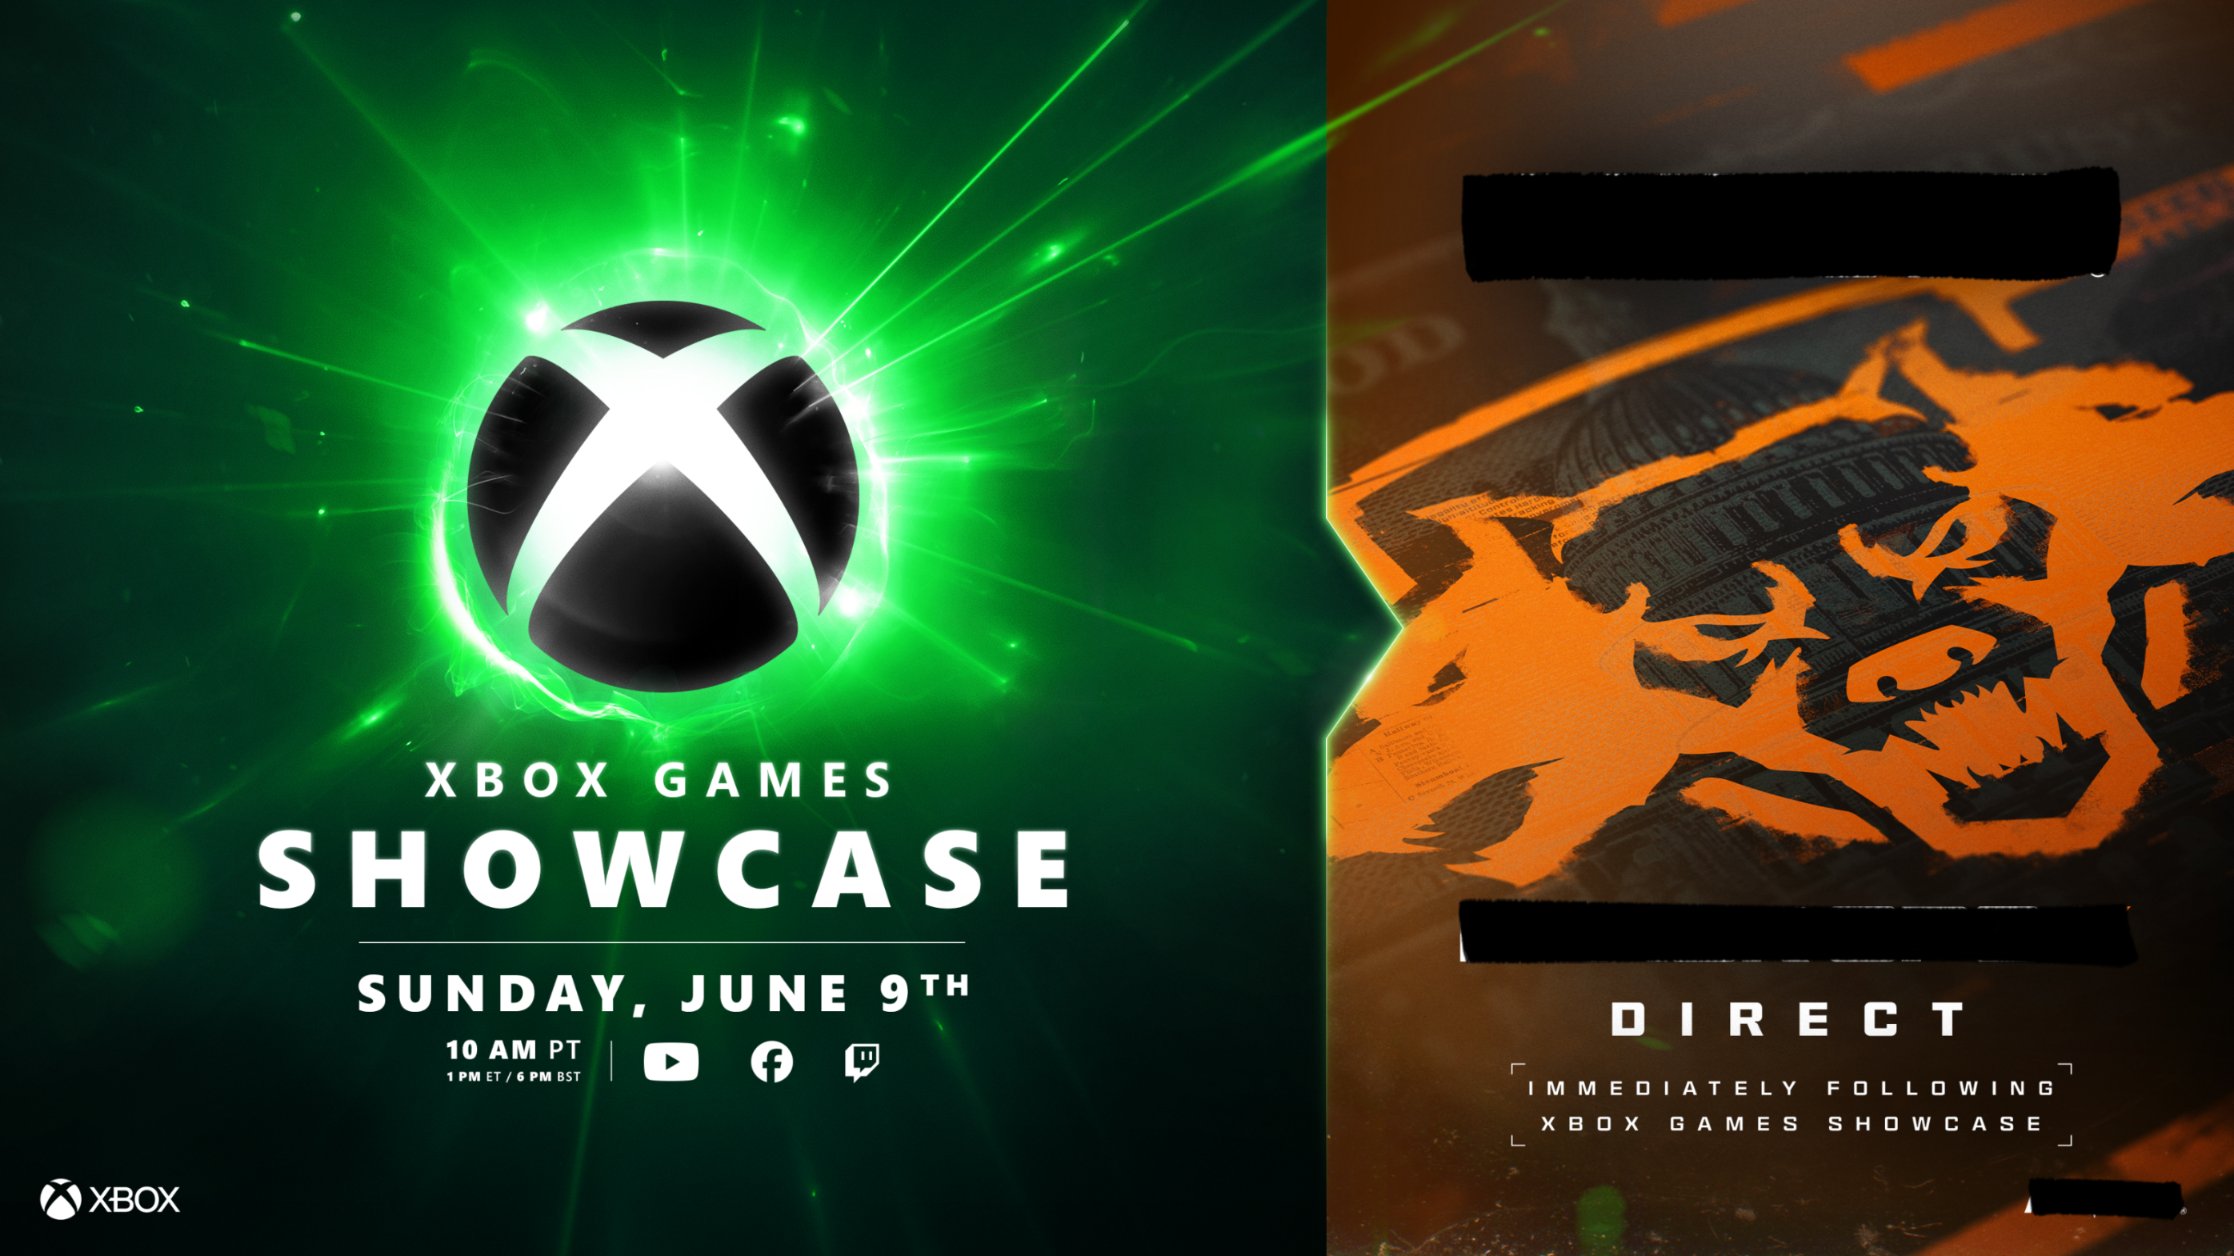 Xbox Games Showcase coming this summer alongside mysterious game reveal